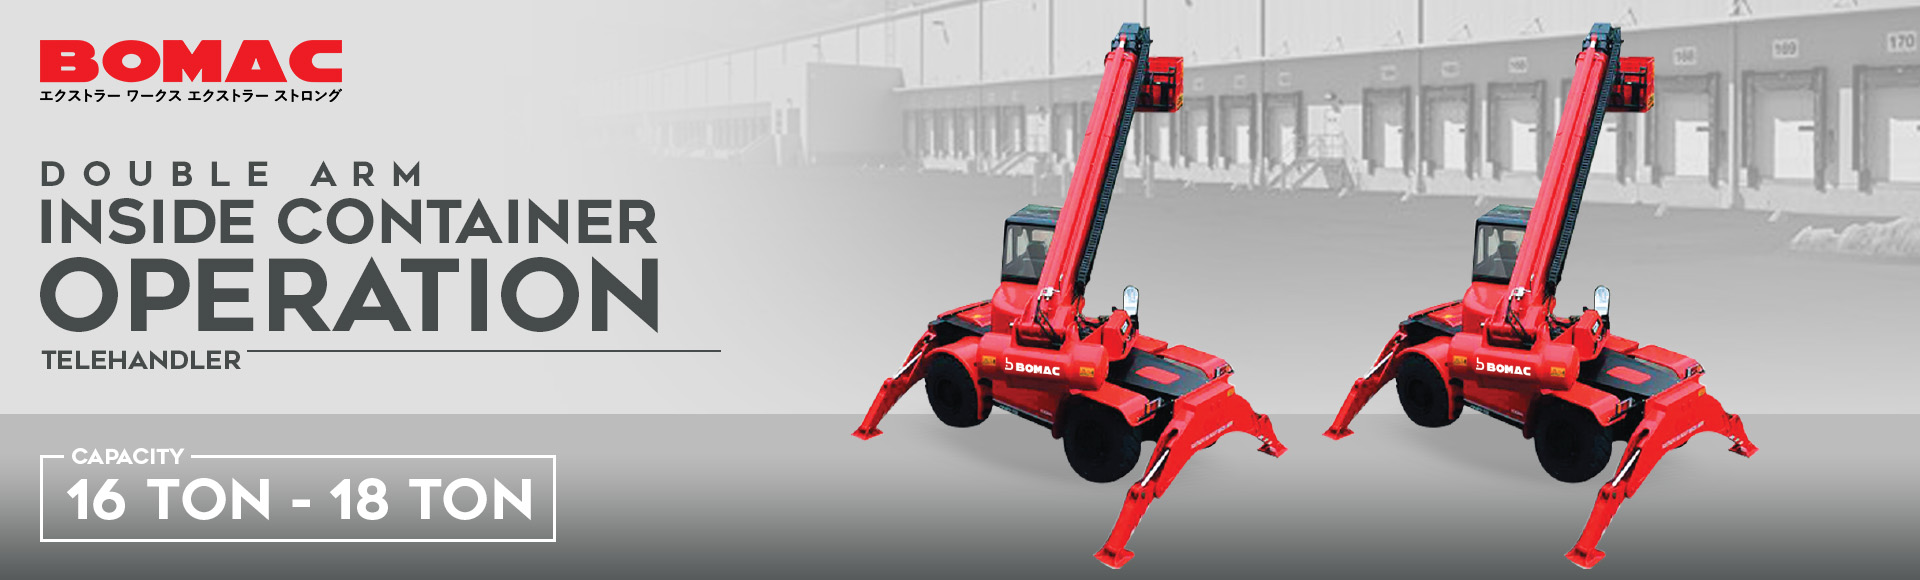 Bomac 16-18 Ton Double Arm Inside Container Operation Telehandler